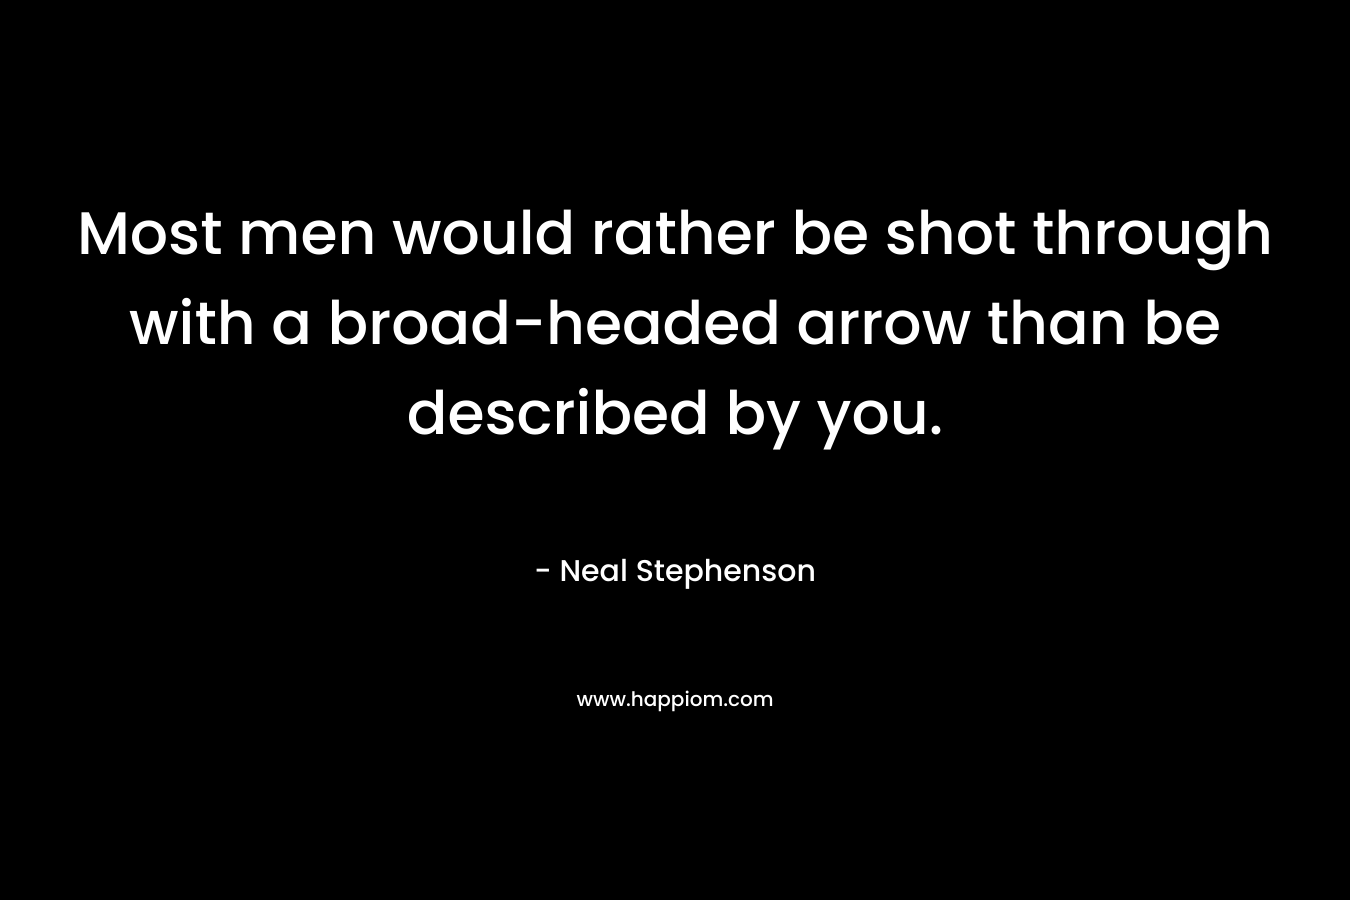 Most men would rather be shot through with a broad-headed arrow than be described by you. – Neal Stephenson